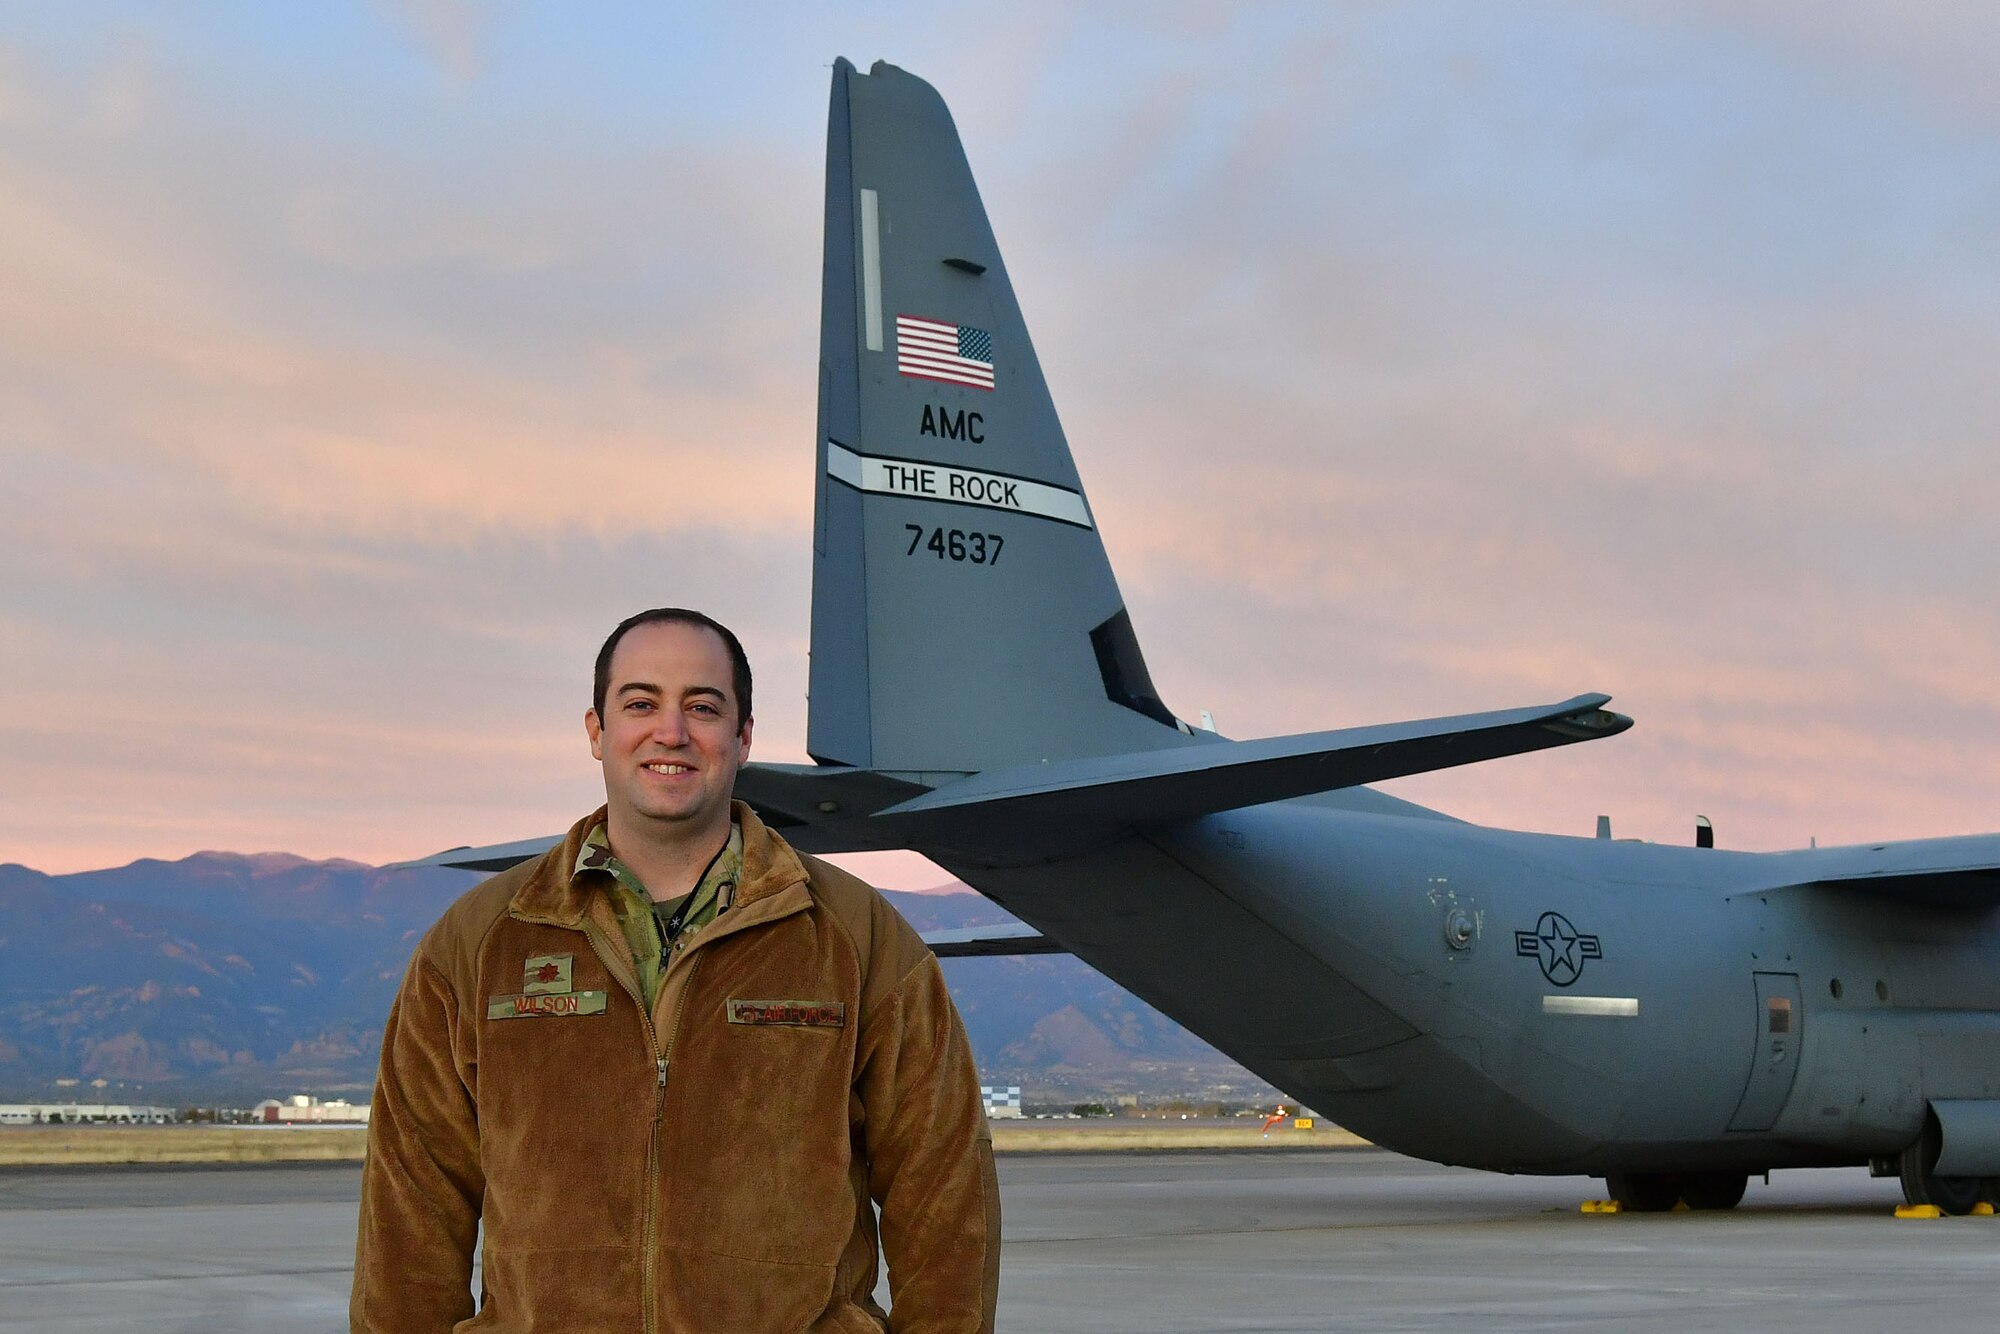 The assistant director of operations poses for a photo in front of a C-130 in Colorado.